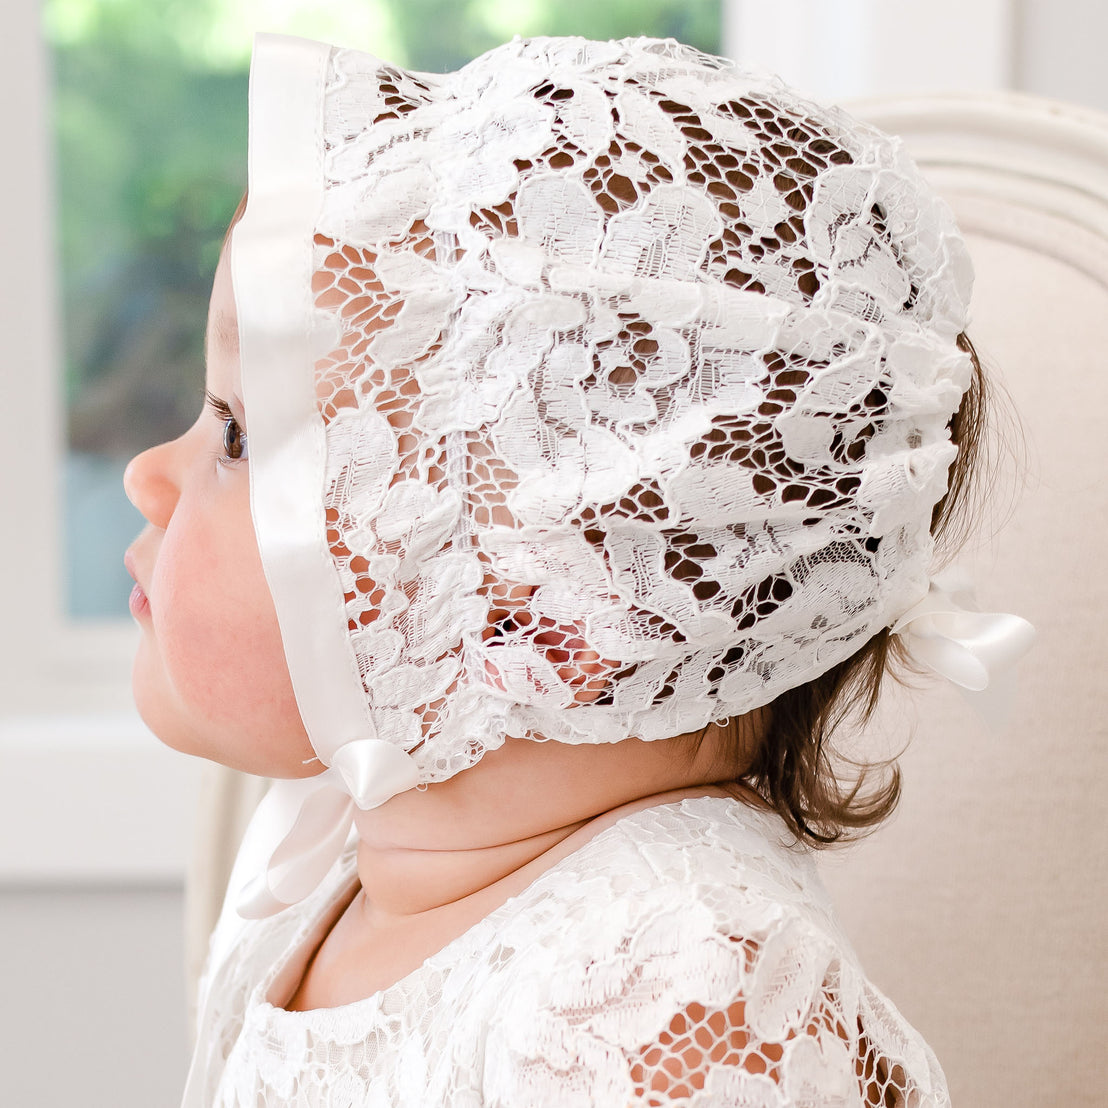 A toddler wearing the Rose Lace Bonnet and dress gazes out a window, with soft lighting illuminating her profile.